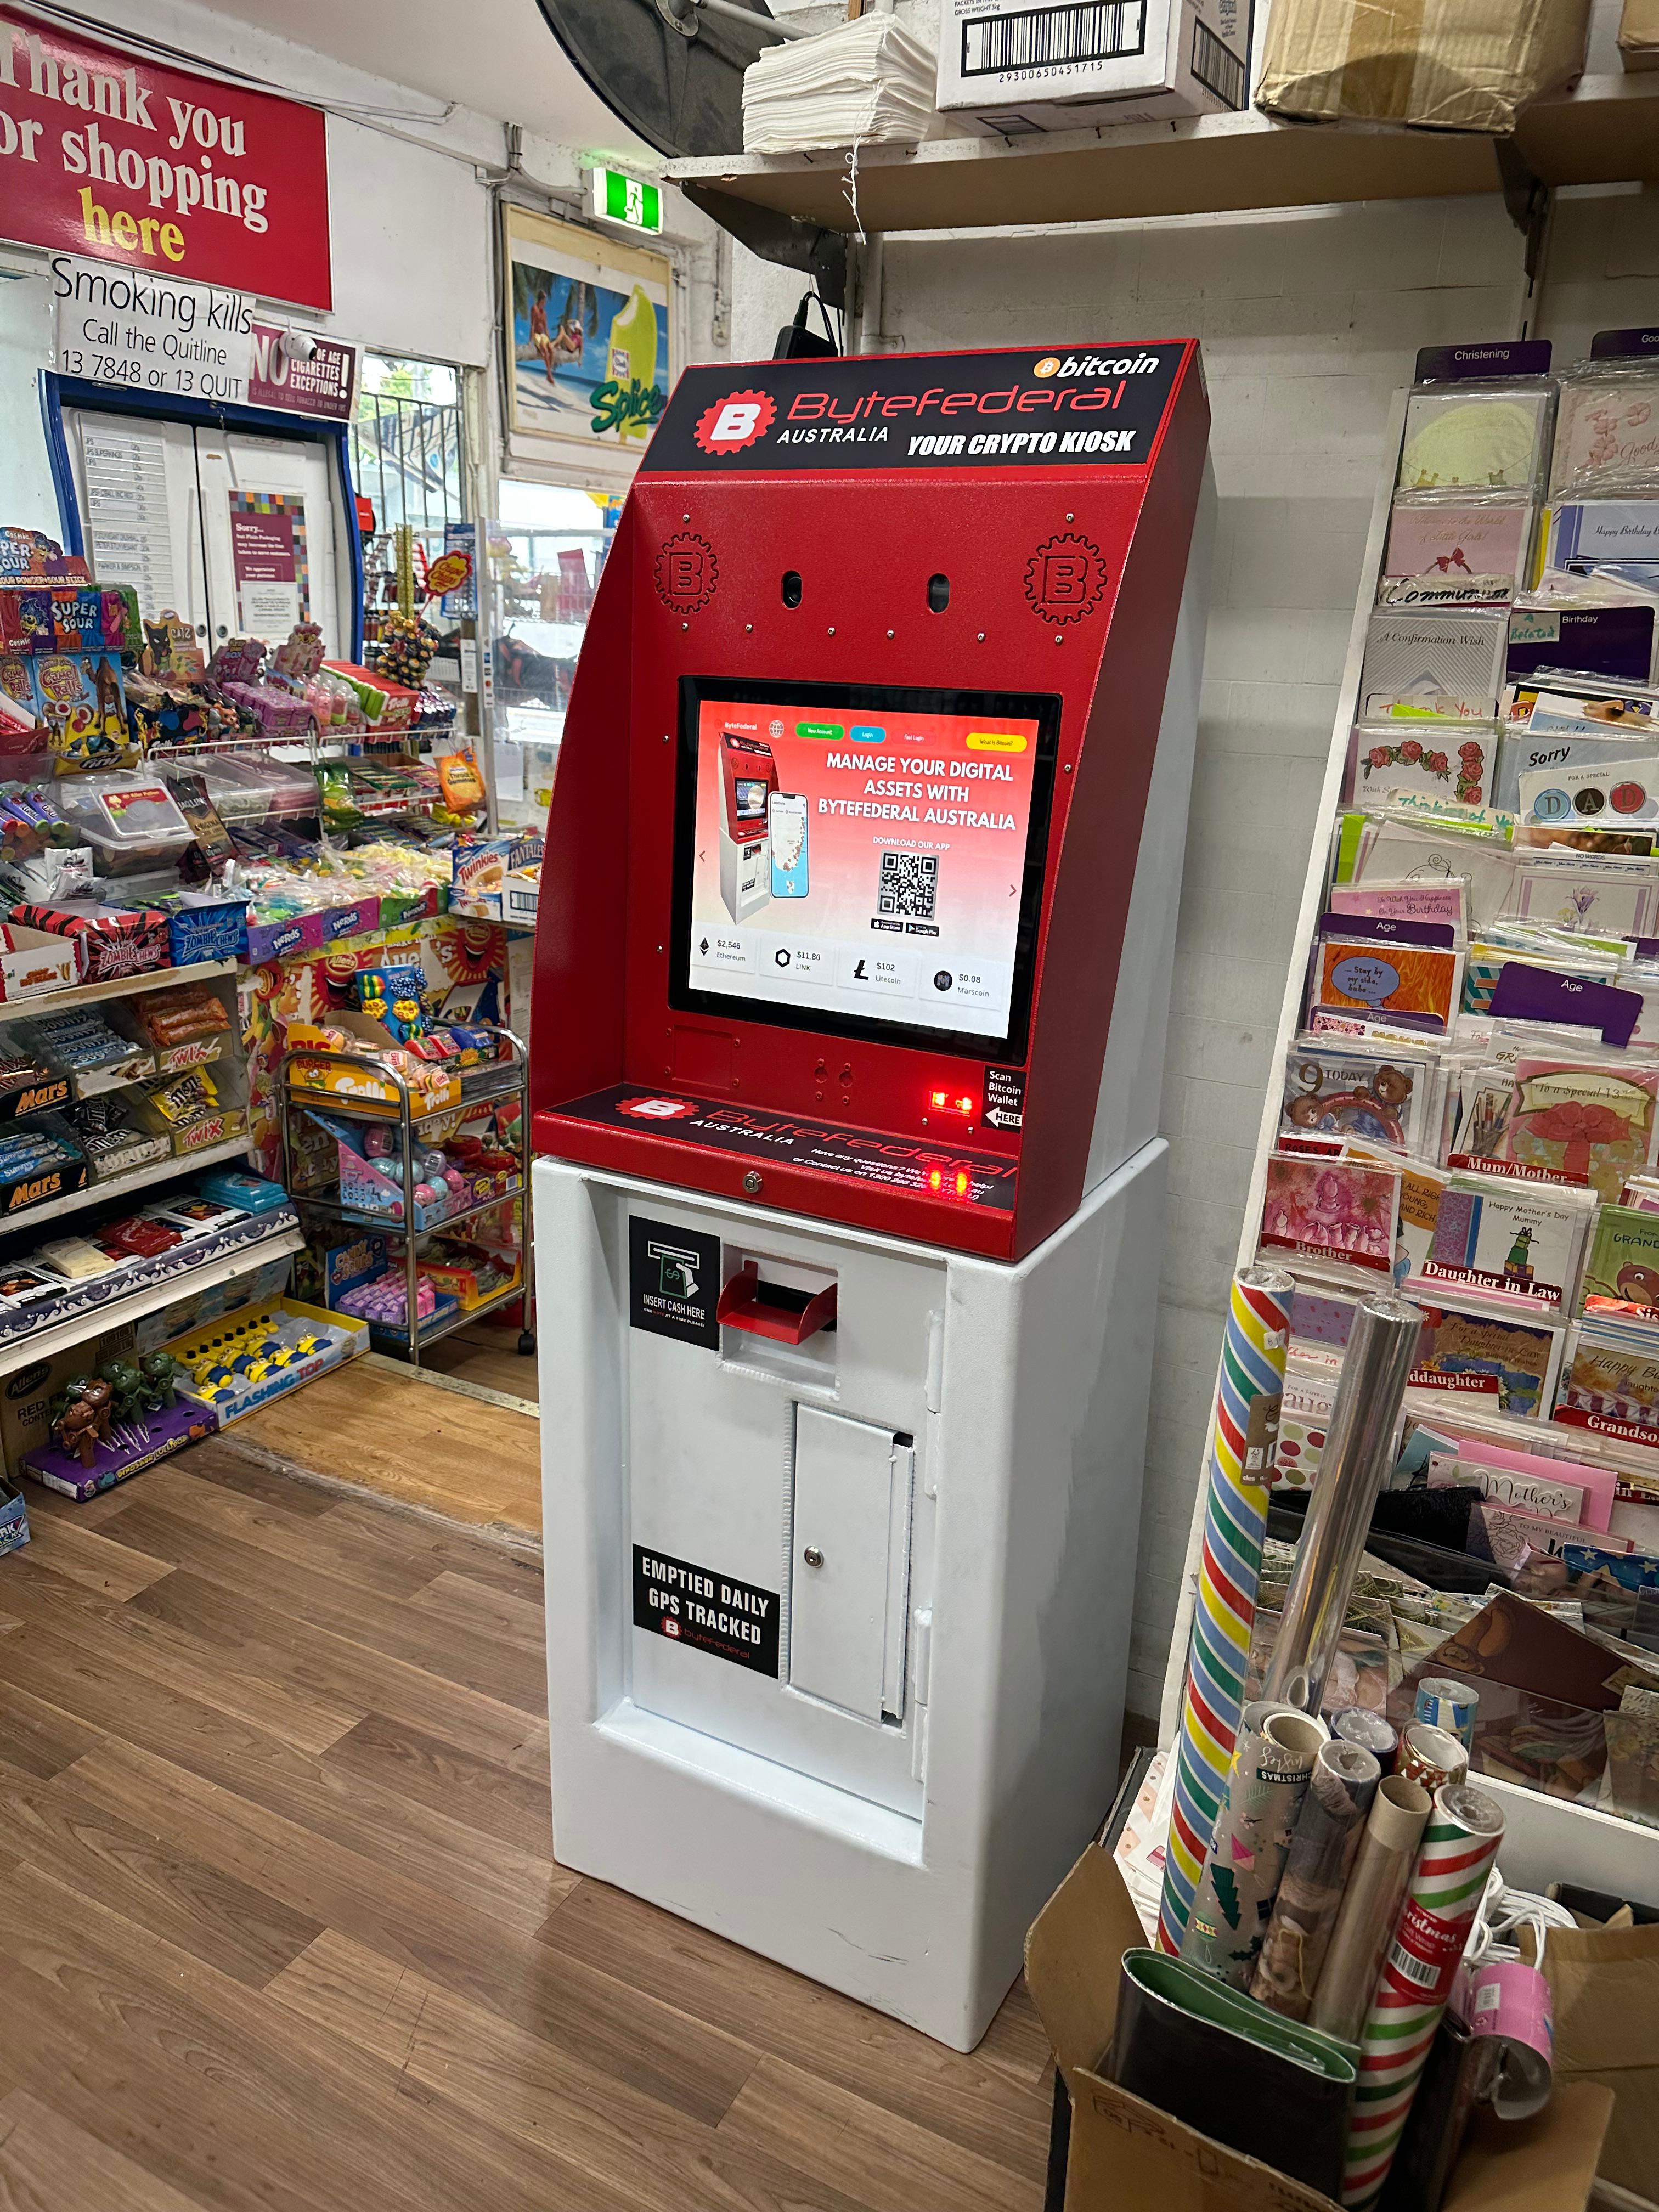 Images ByteFederal Australia Bitcoin ATM (G & M Convenience Store)